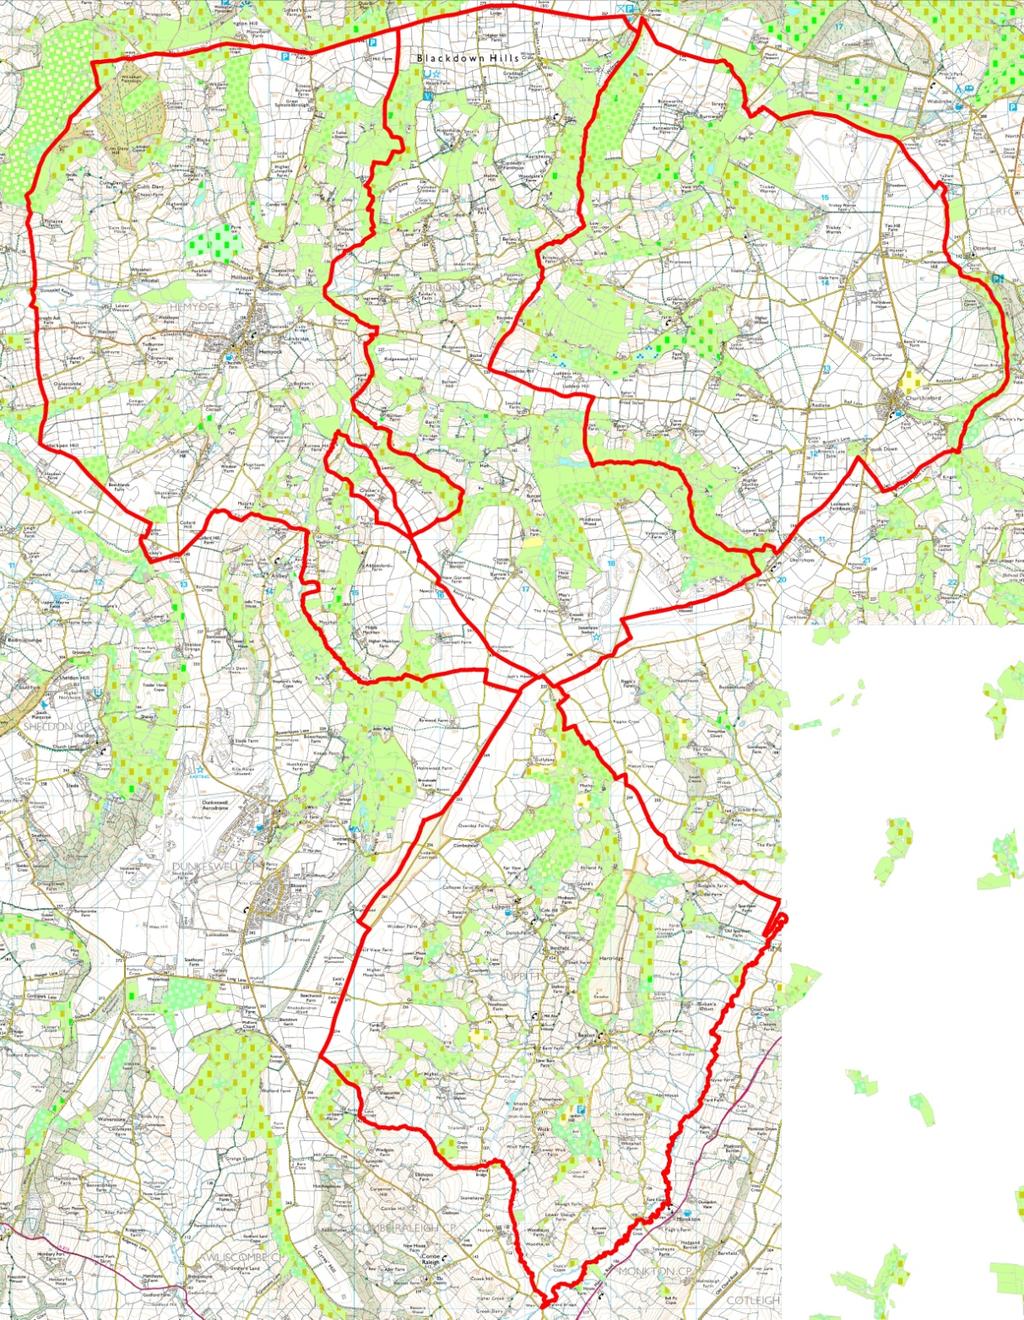 HNV map produced for 4 test parishes, as basis for analysis in